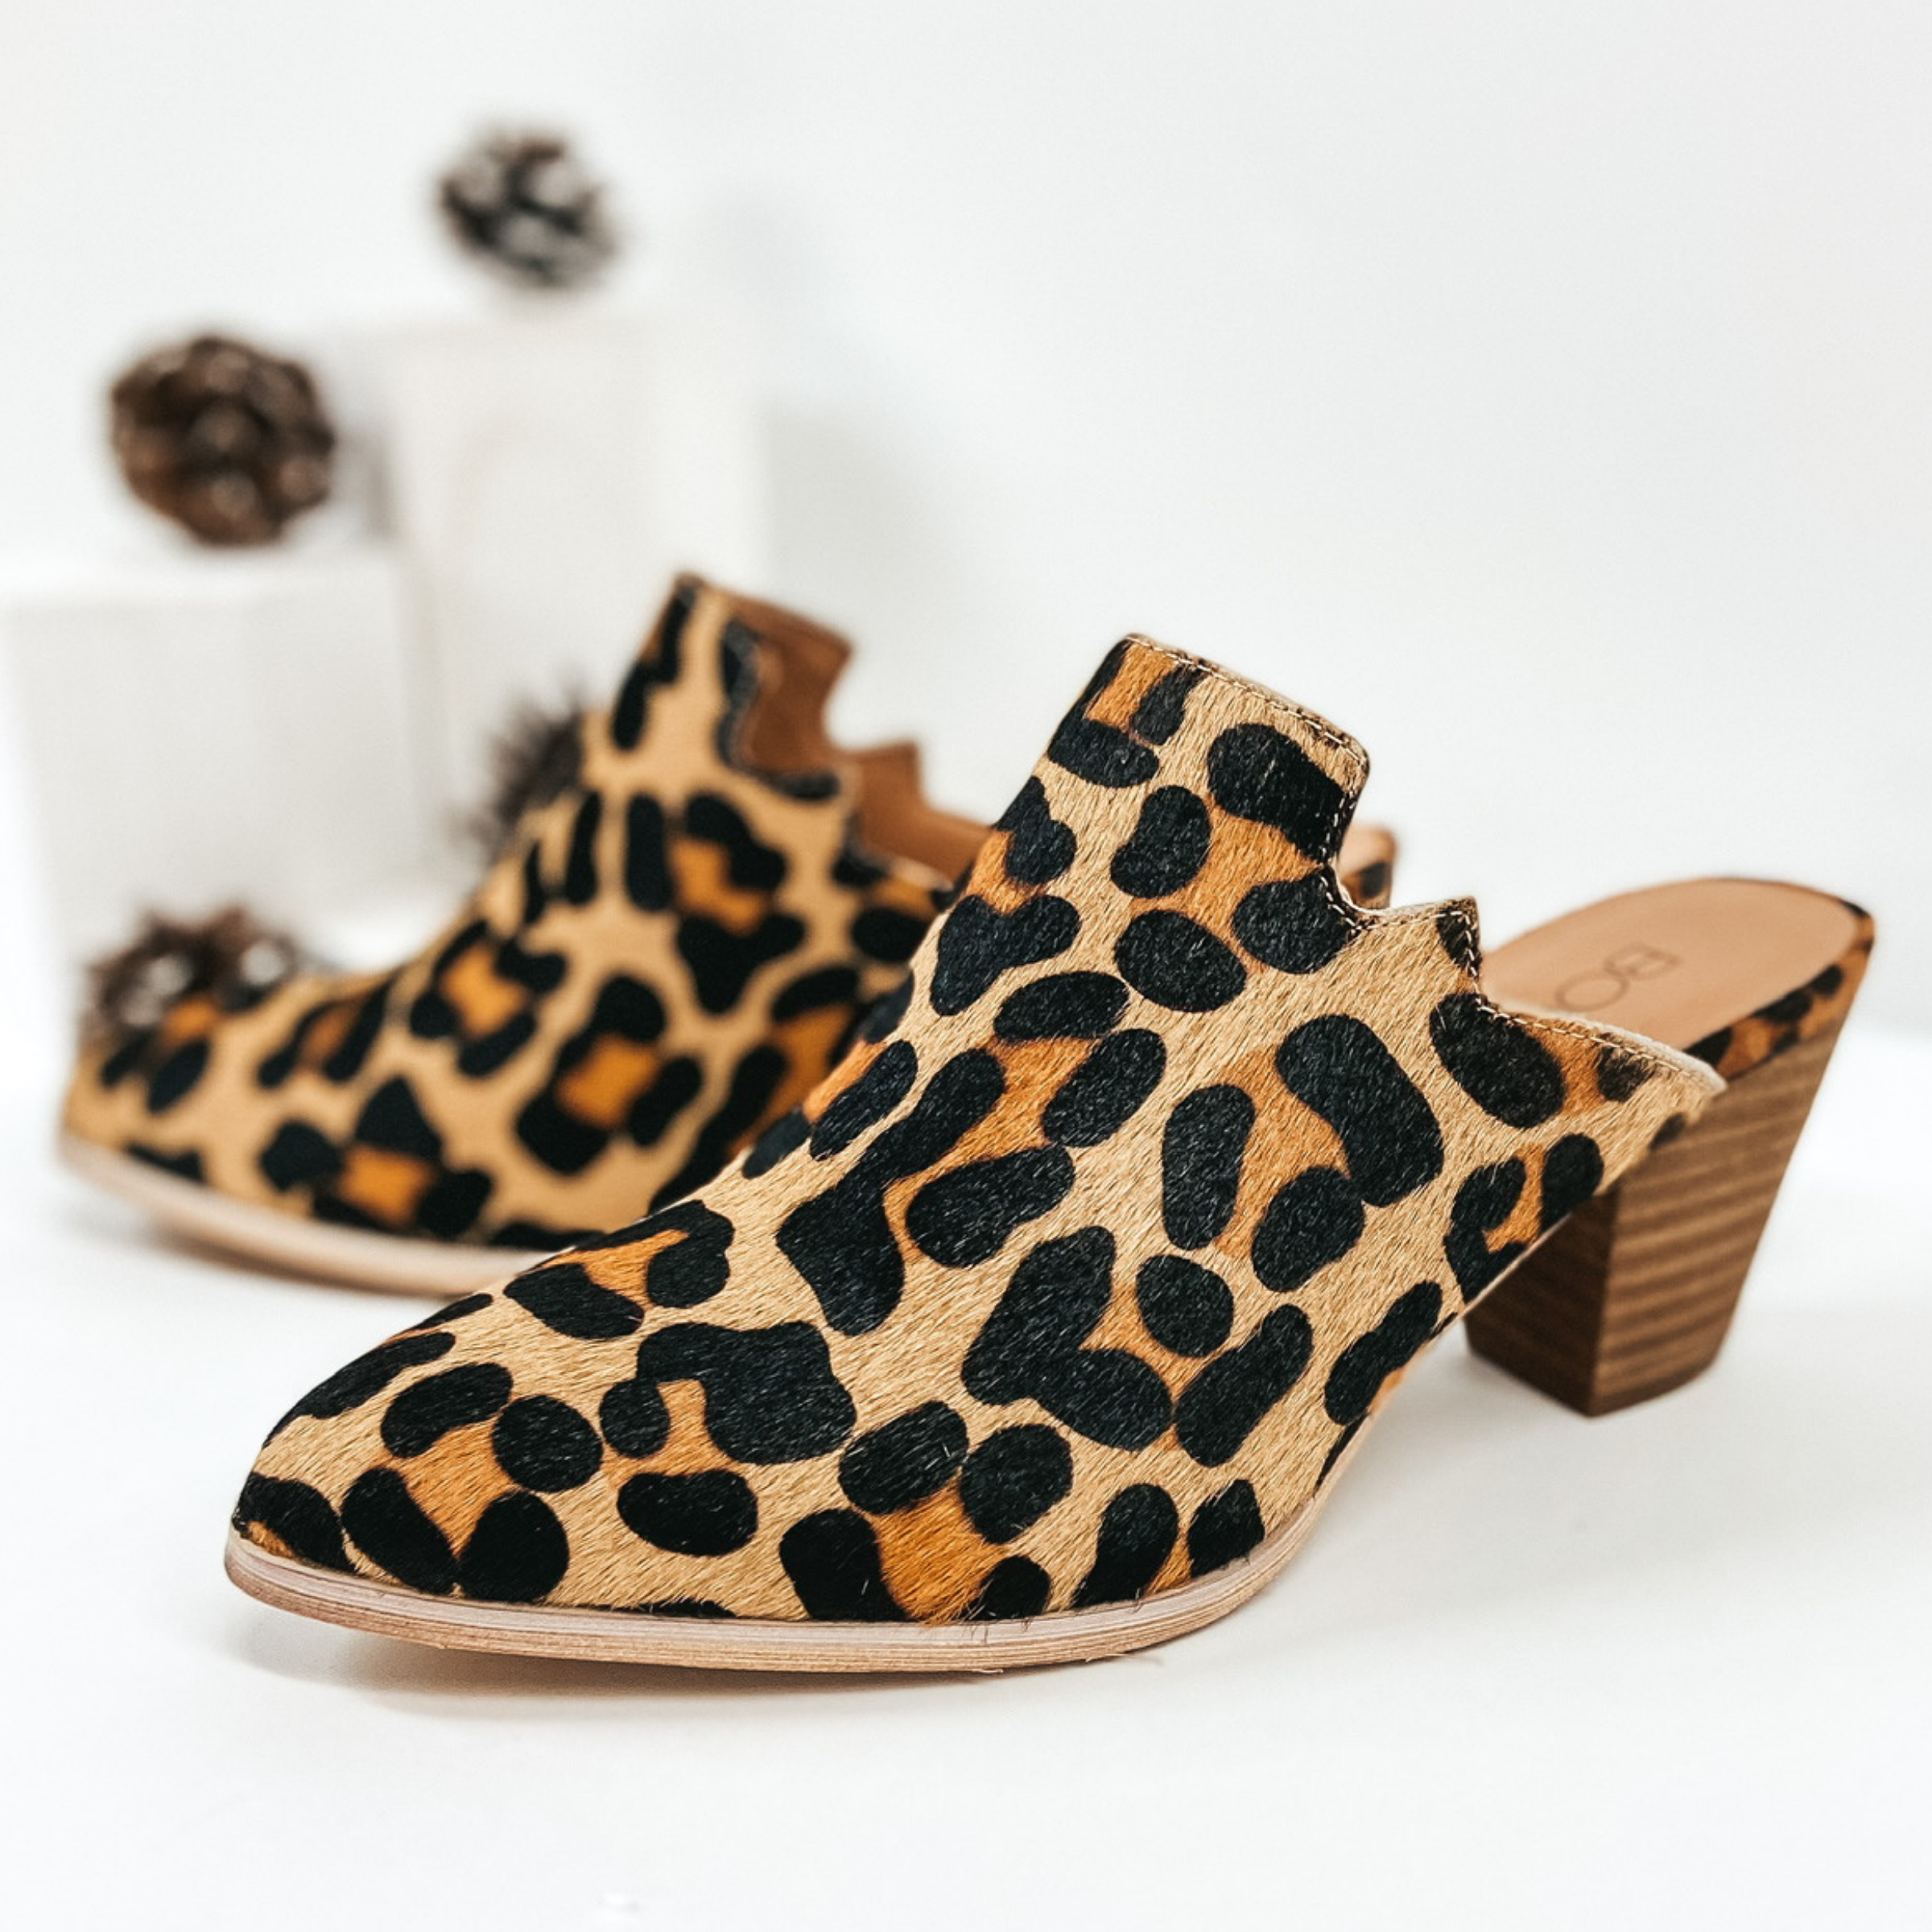 Leopard print hair on hide heeled mules. Pictured on white background with pinecones.